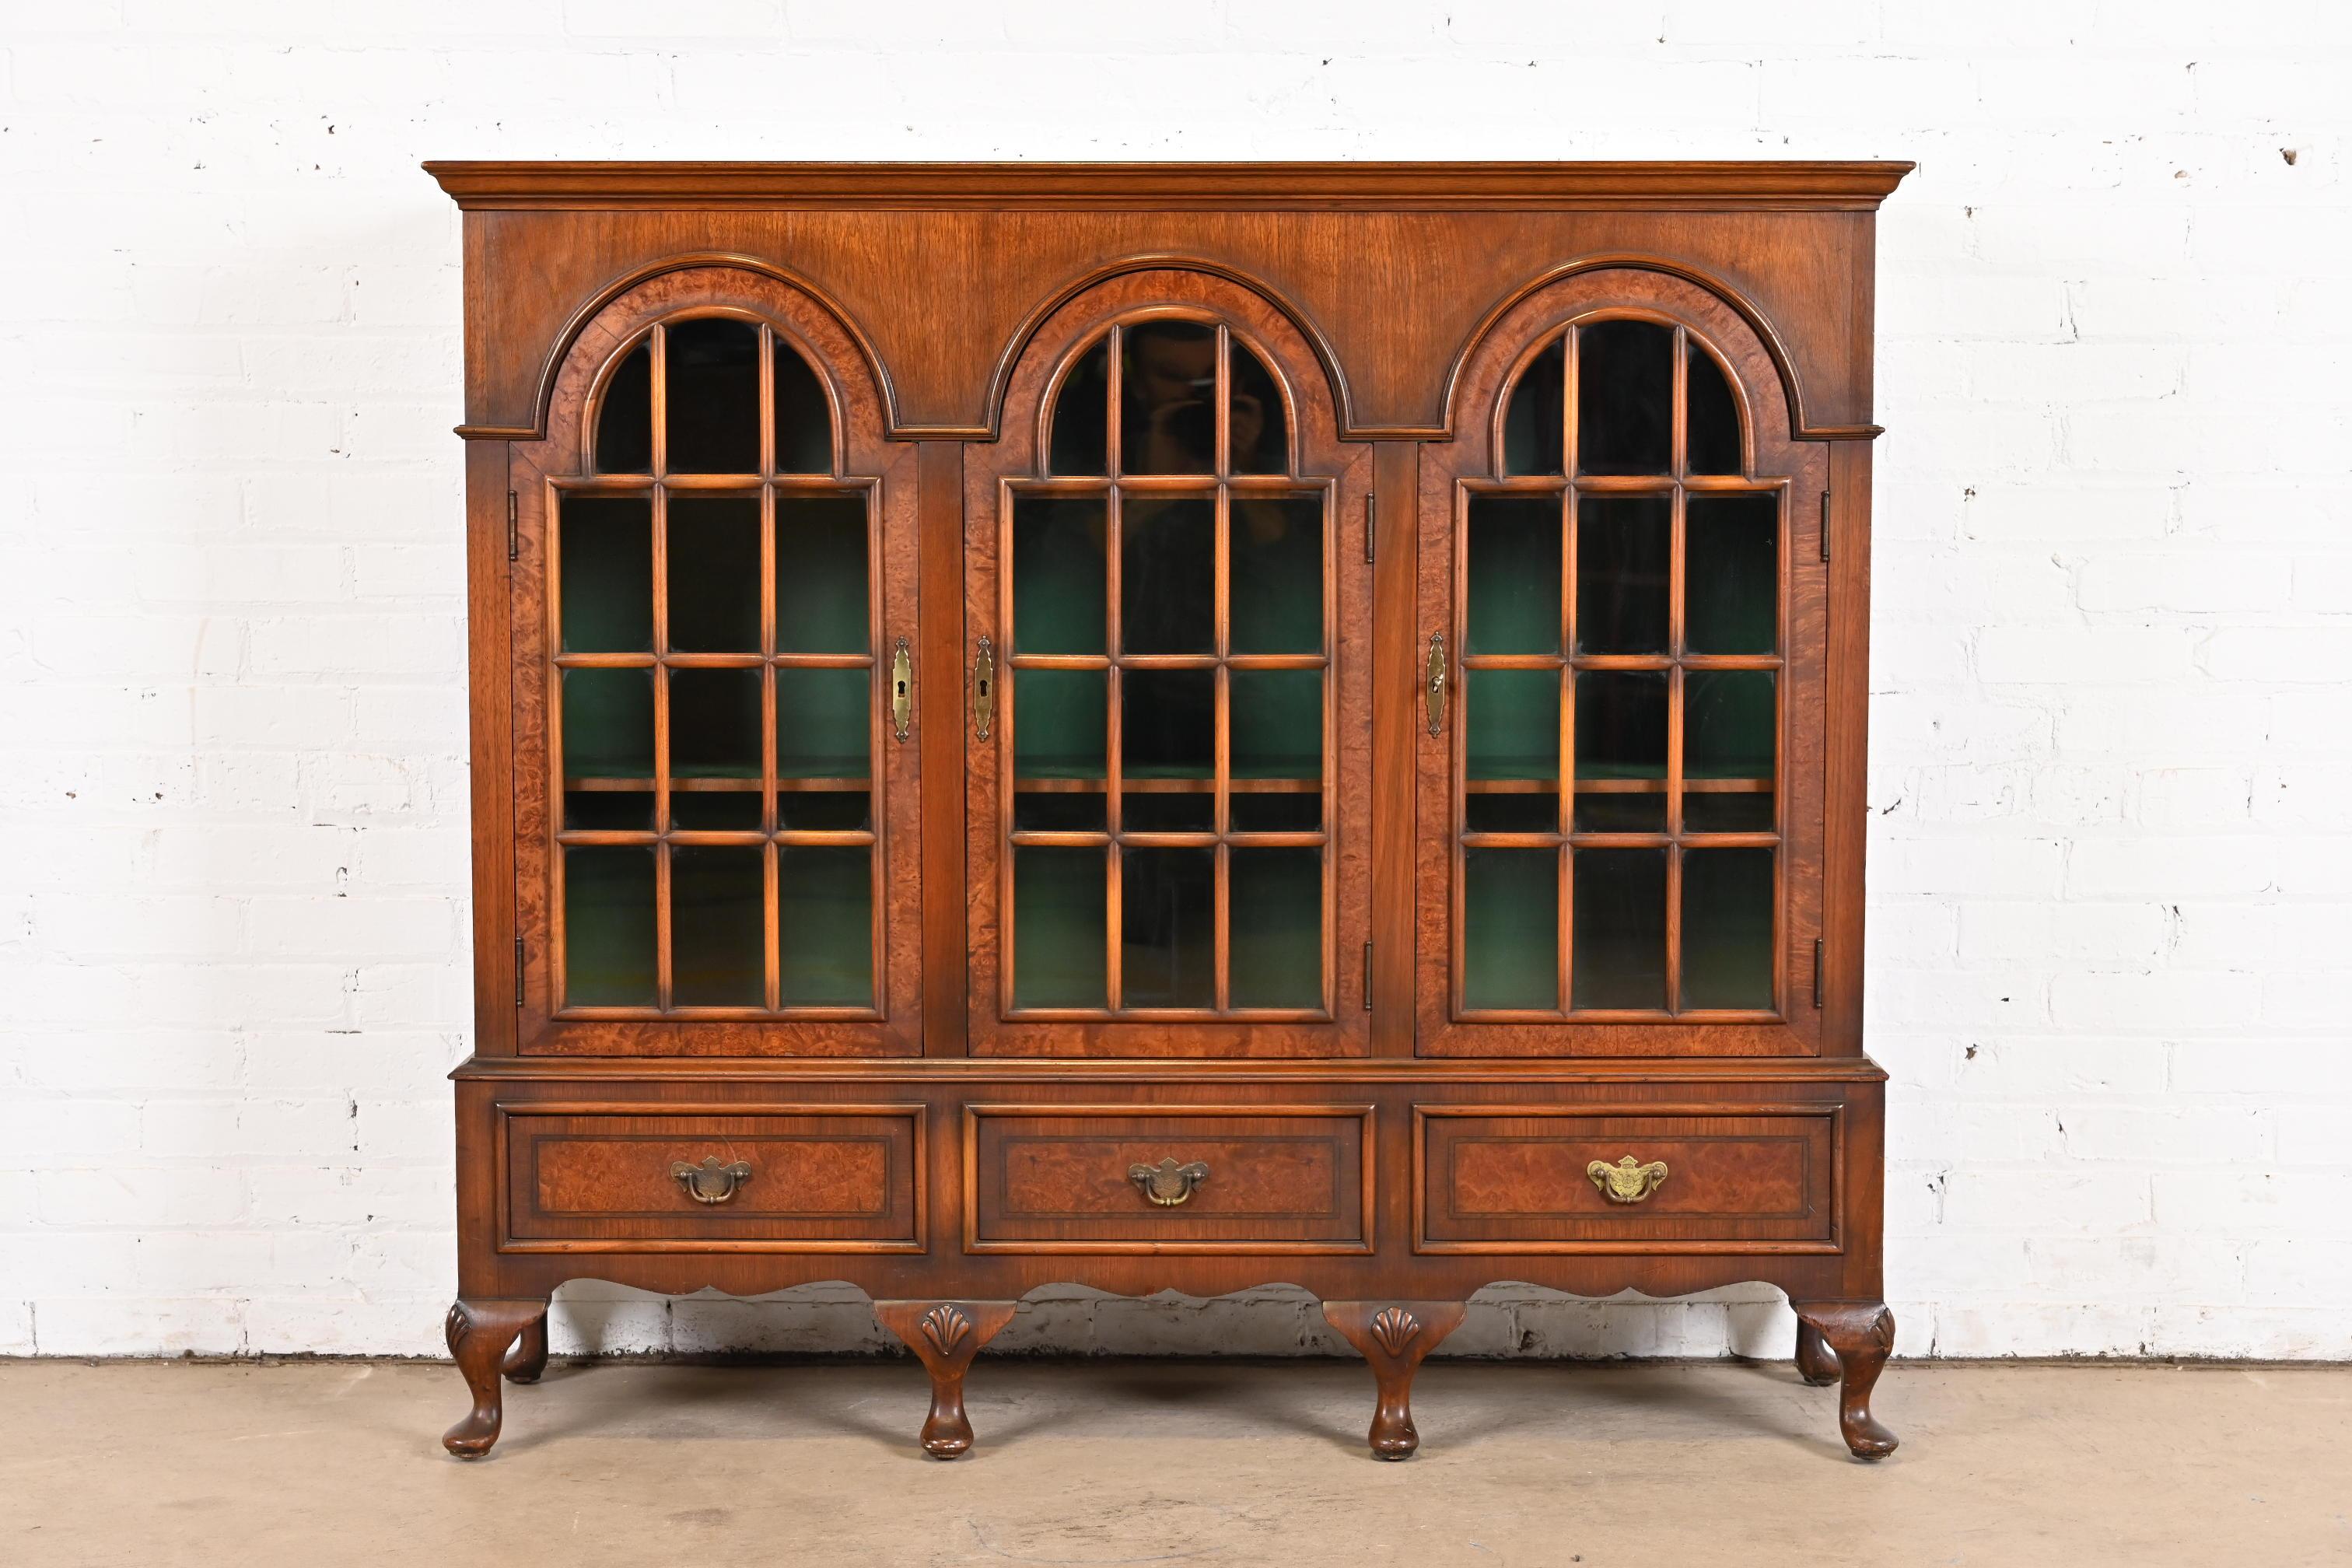 A beautiful antique Georgian or Queen Anne style glass front triple bookcase

USA, Early 20th Century

Carved walnut, with burled wood inlay, mullioned glass front doors, green painted interior, and original brass hardware.

Measures: 52